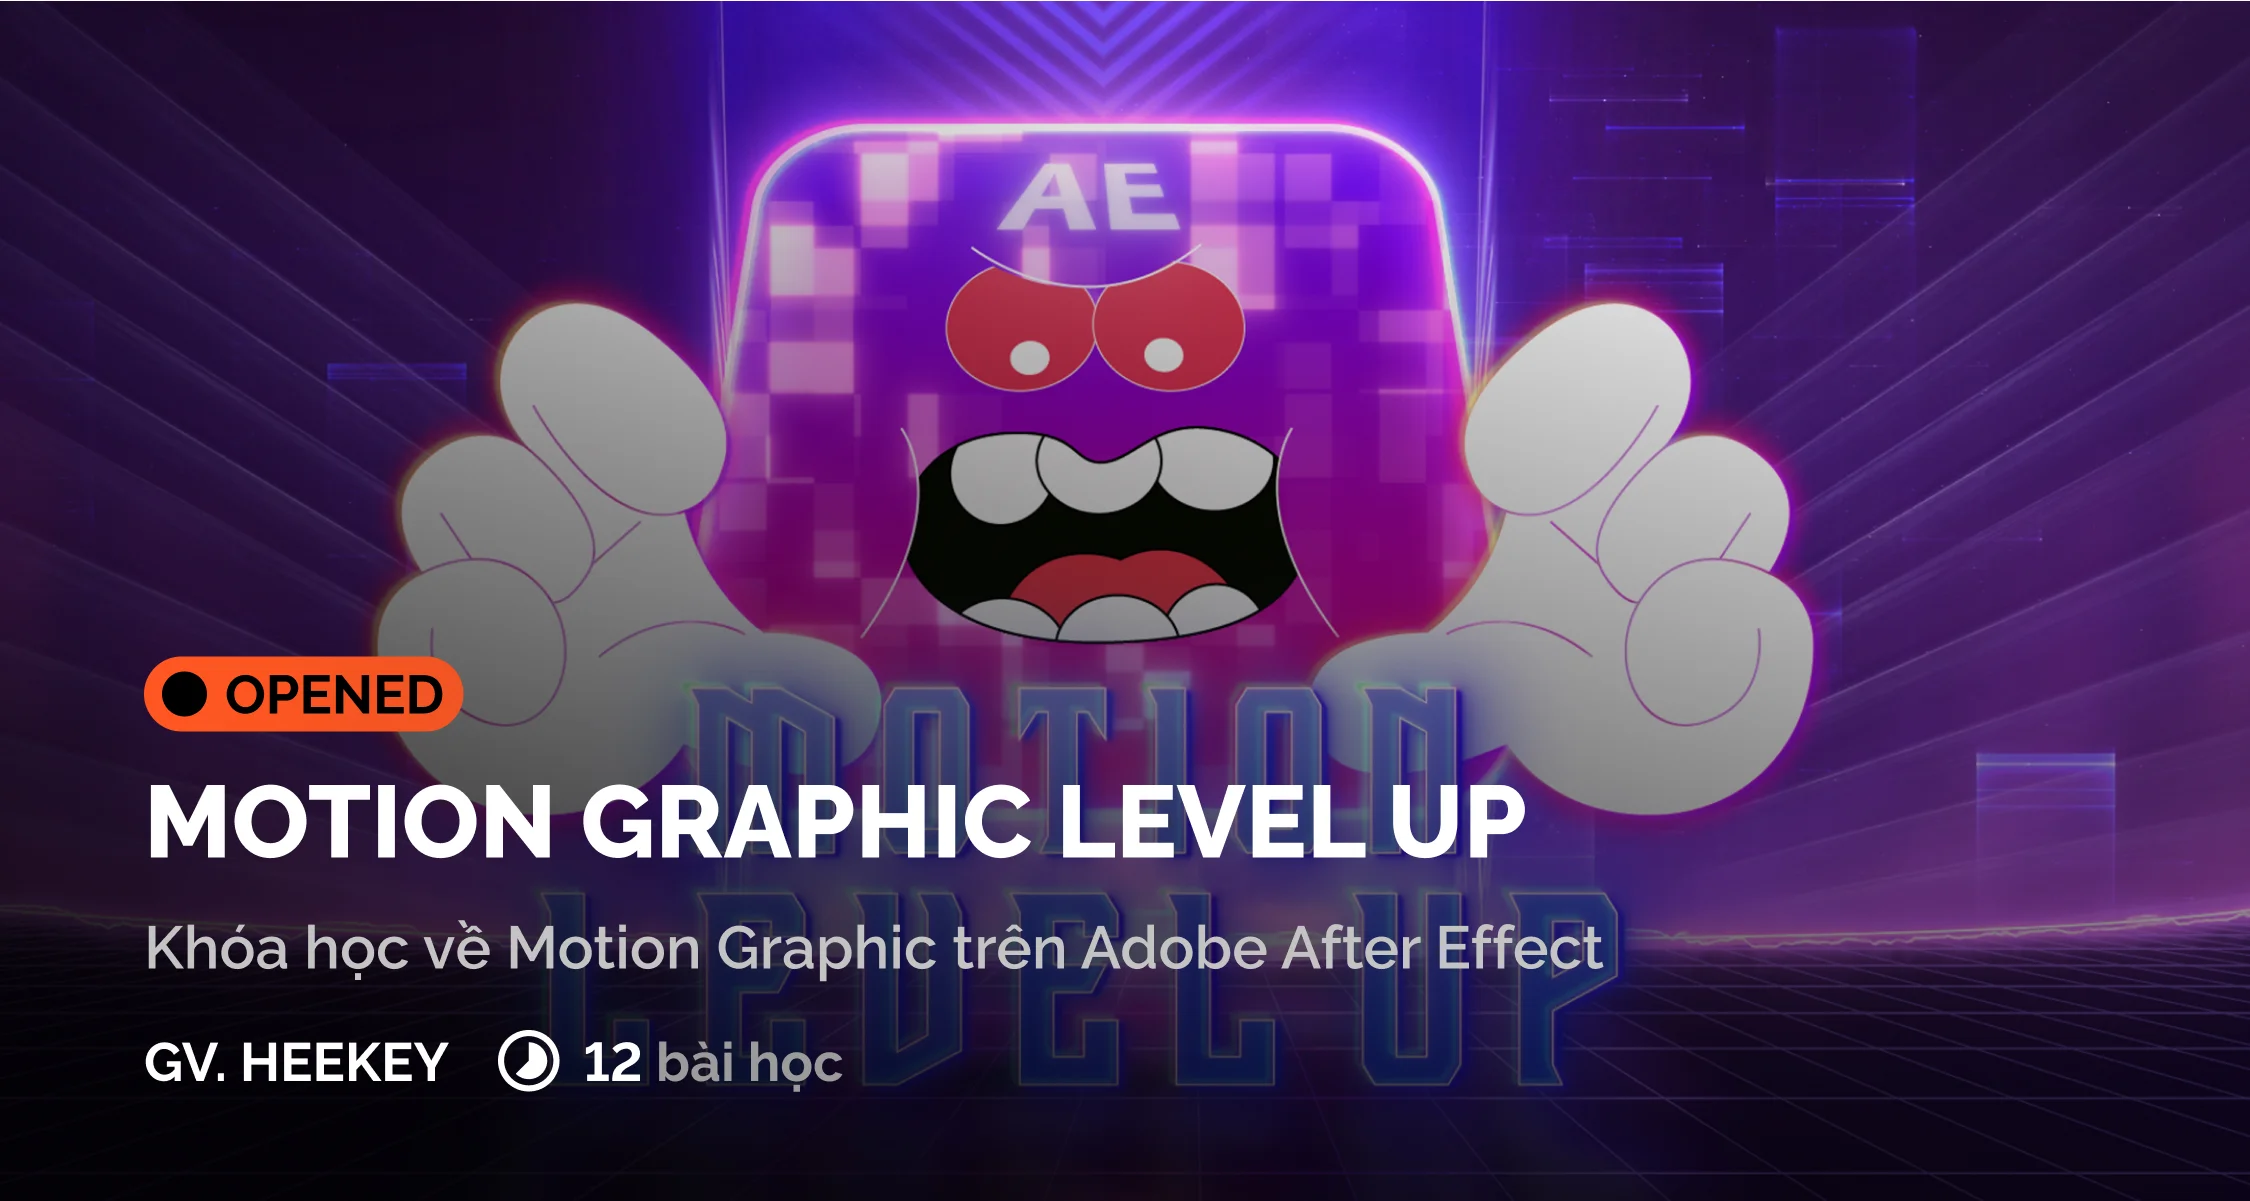 MOTION GRAPHIC 2D: LEVEL UP